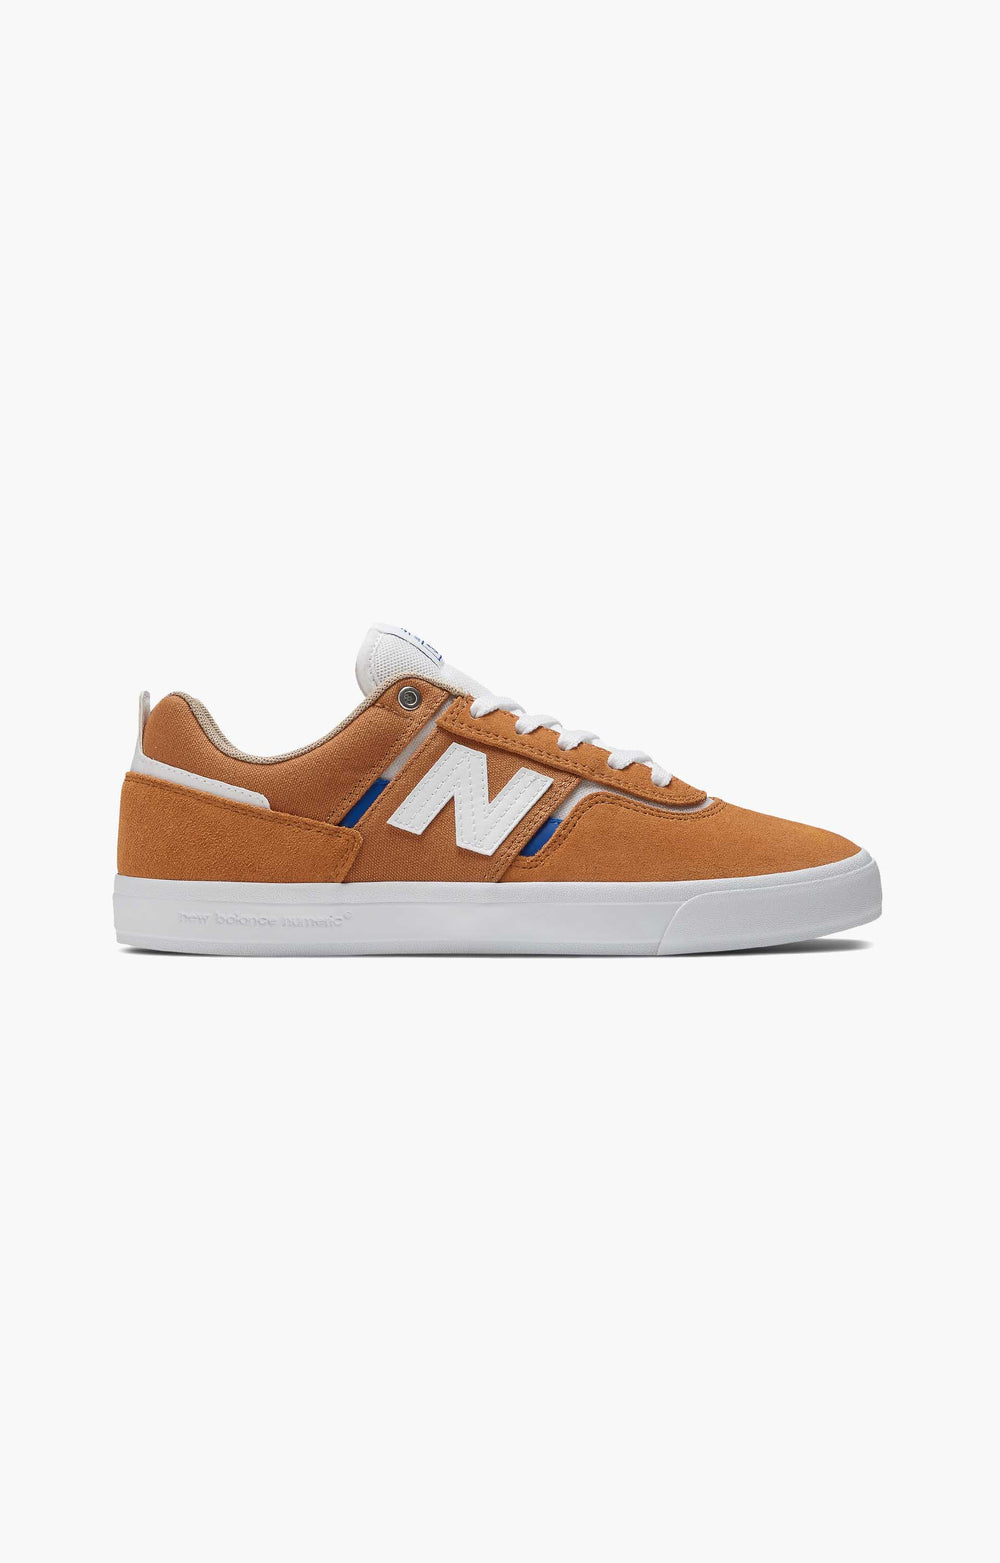 New Balance Numeric NM306CRY Shoe, Brown